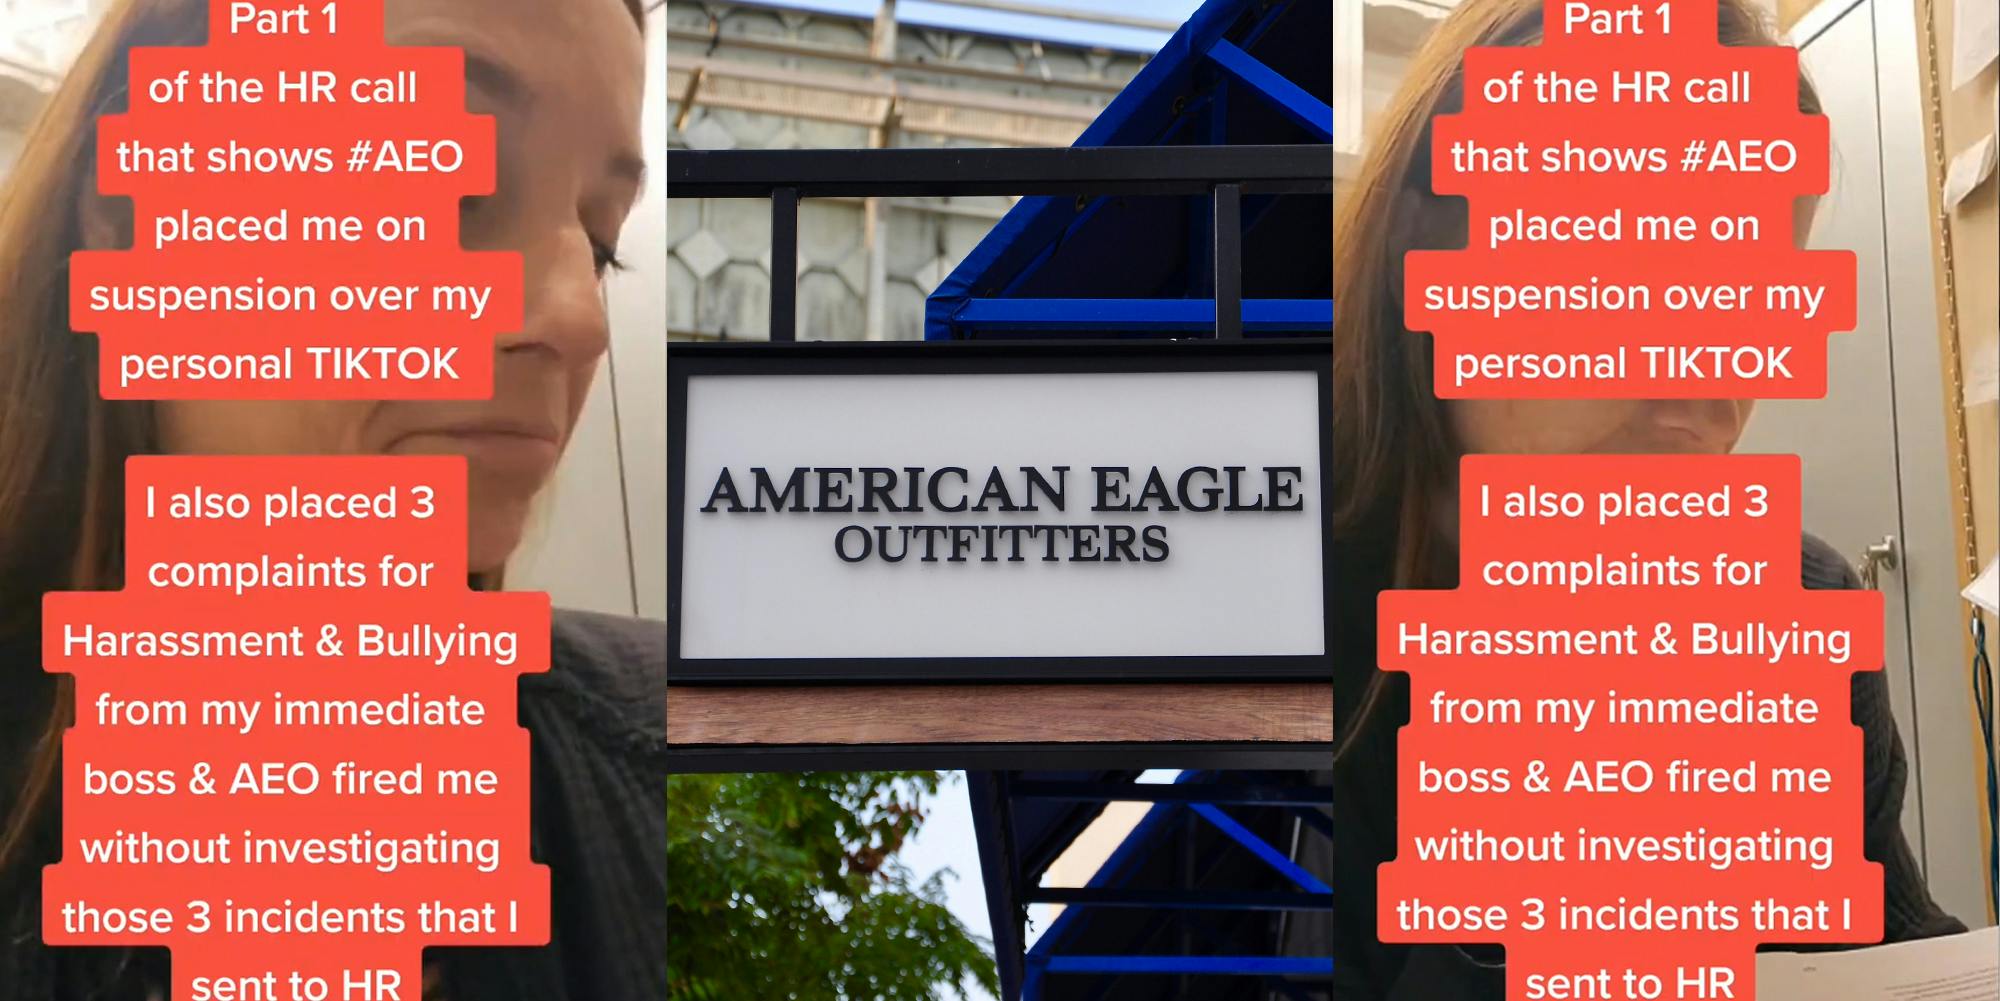 woman with caption "Part 1 of the HR call that shows #AEO placed me on suspension over my personal TIKTOK I also placed 3 complaints for Harassment & Bullying from my immediate boss & AEO fired me without investigating those 3 incidents that I sent to HR" (l) American Eagle Outfitters sign outside (c) woman with caption "Part 1 of the HR call that shows #AEO placed me on suspension over my personal TIKTOK I also placed 3 complaints for Harassment & Bullying from my immediate boss & AEO fired me without investigating those 3 incidents that I sent to HR" (r)